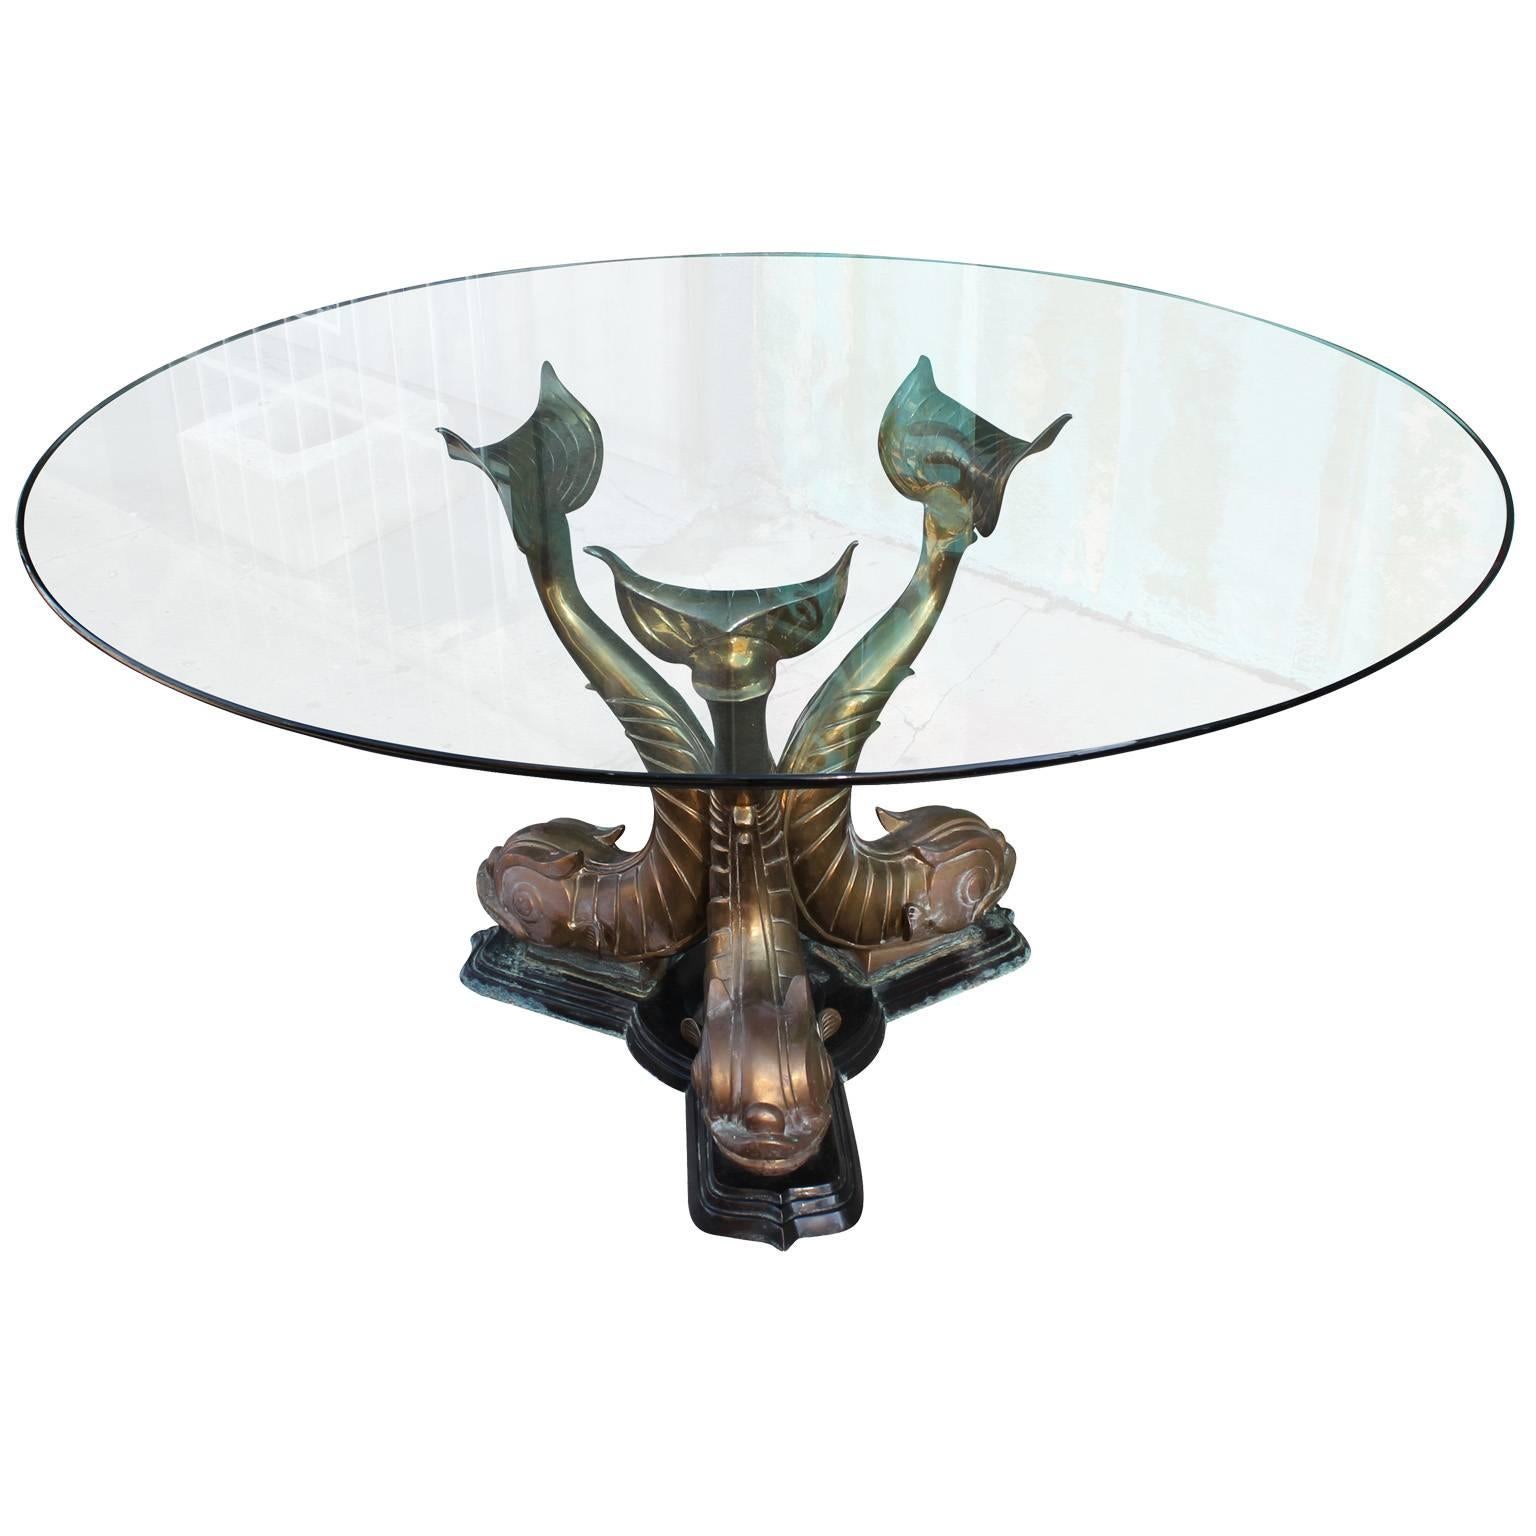 Incredible round dining table. Brass table base depicts three sculptural Dolphin fish. Topped with a thick glass, round top. The Table has a wonderful patina to it and is in excellent condition.